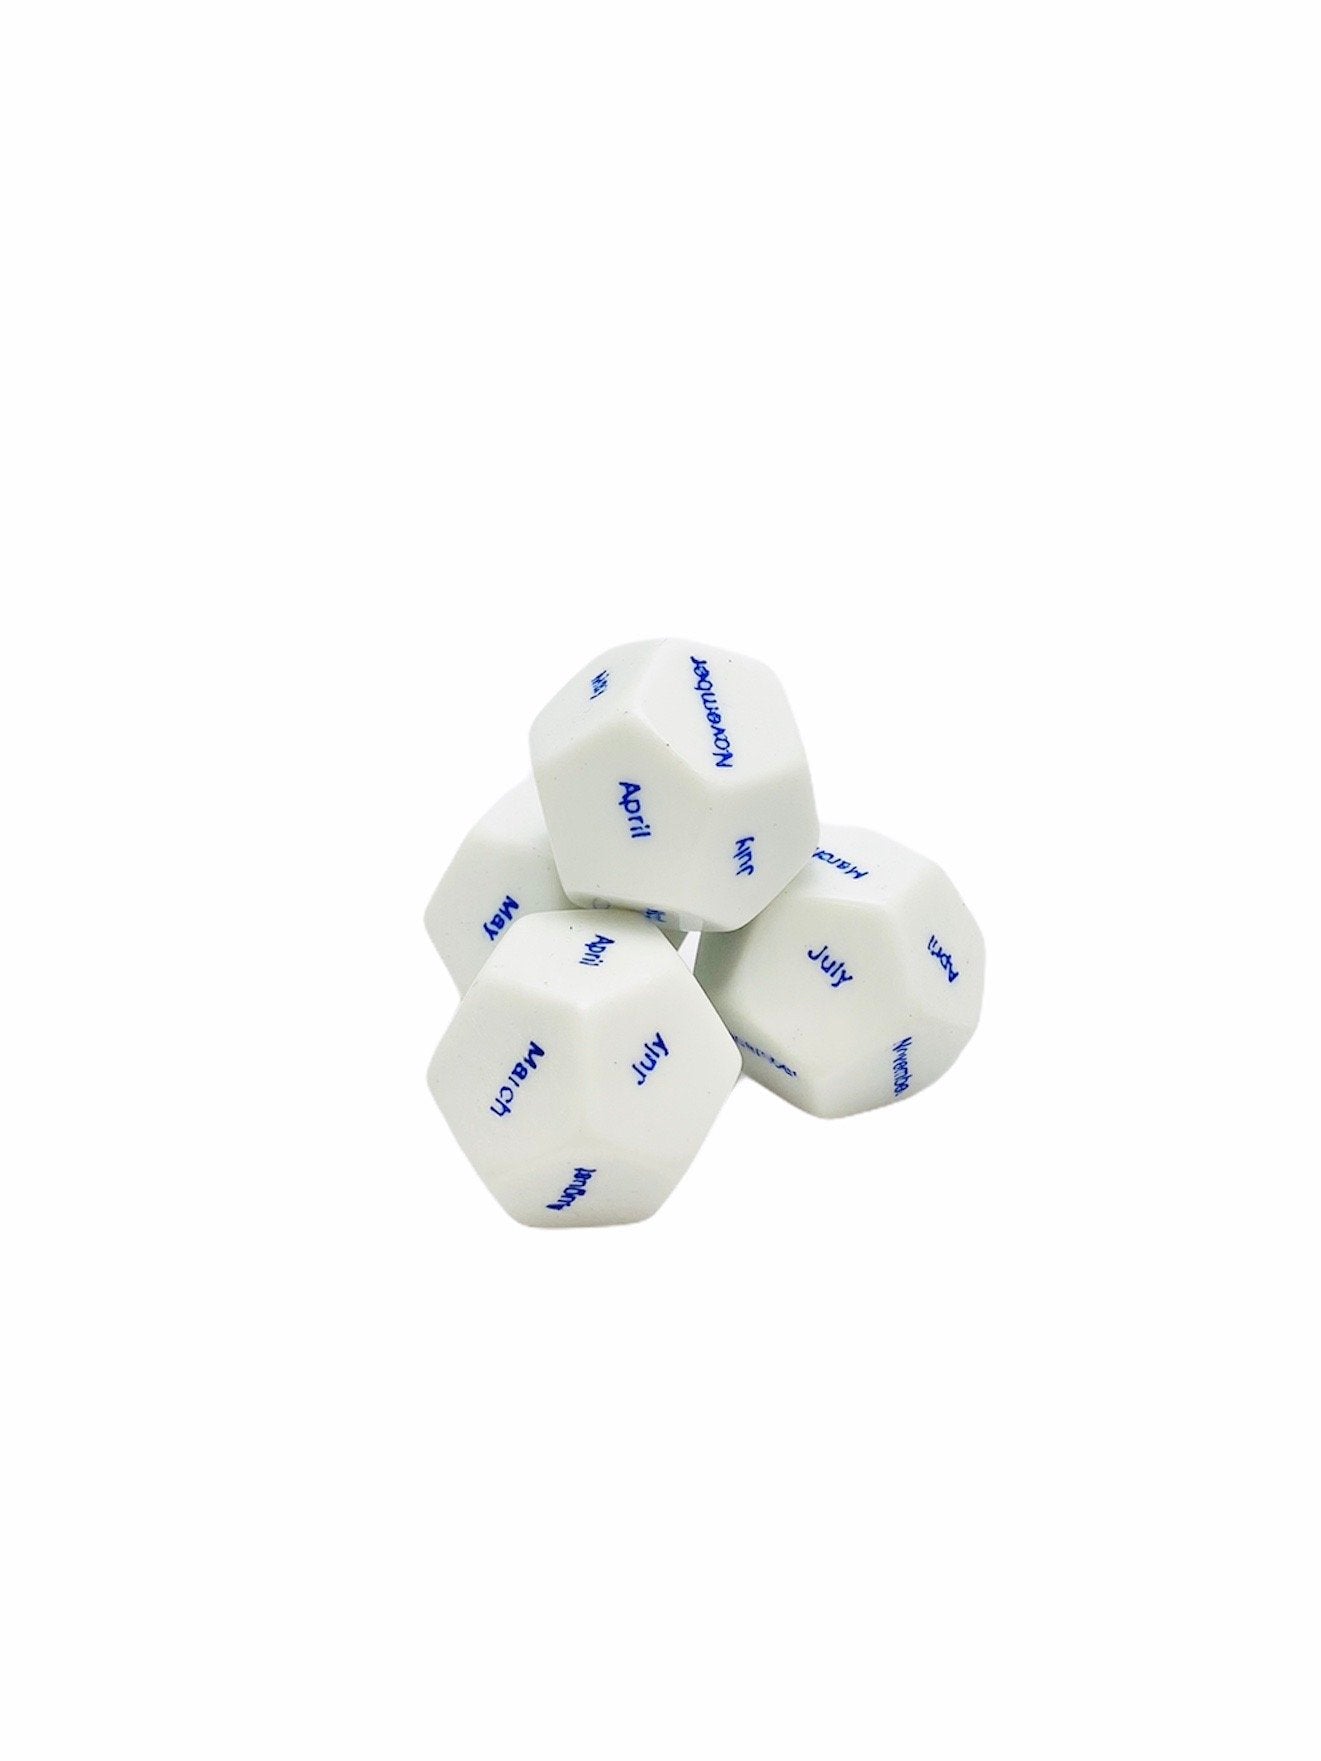 Months of the Year Dice